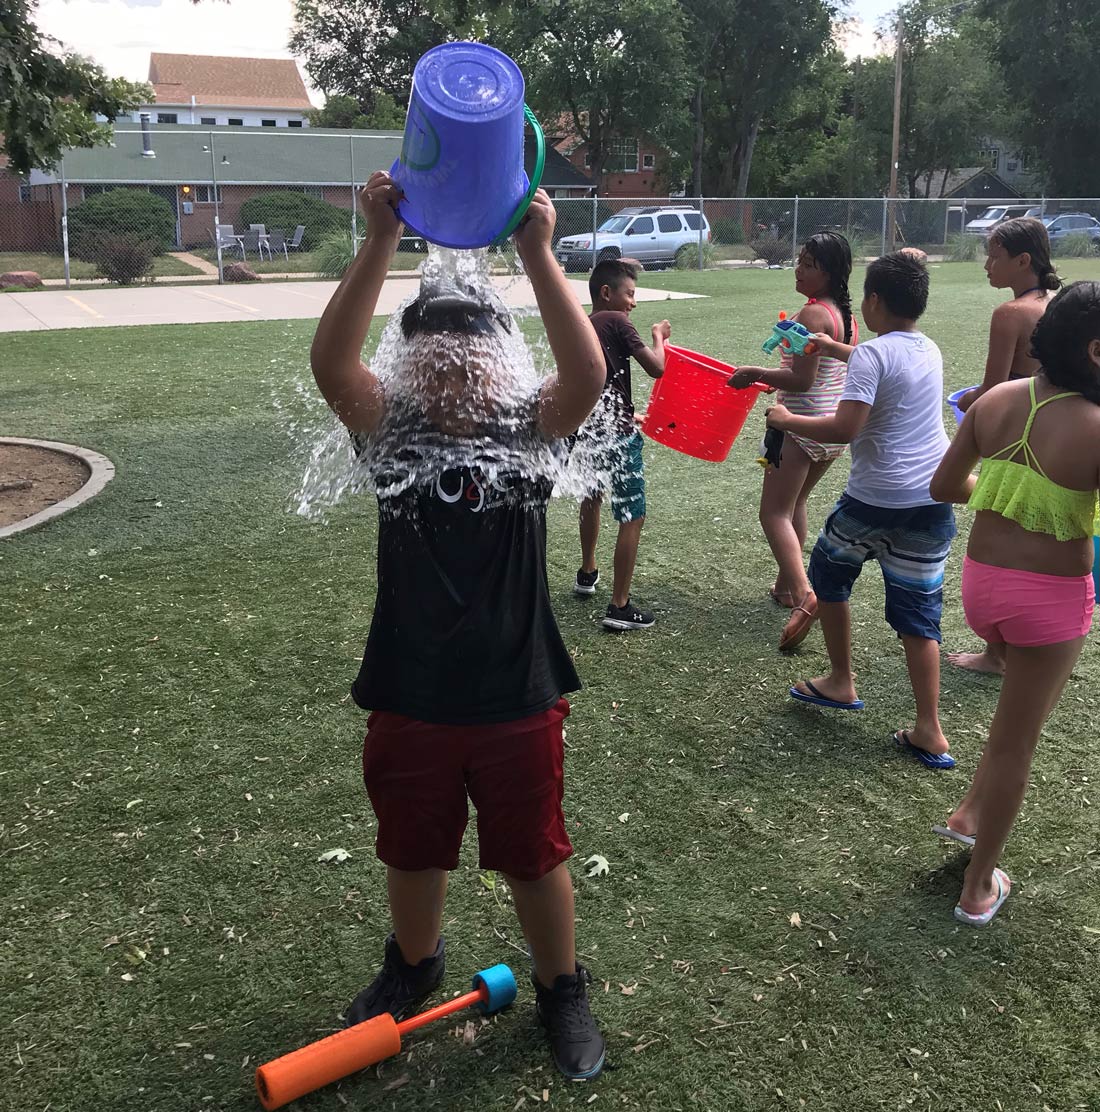 A kid dumps a bucket of water on his head. In the background other kids play with water.